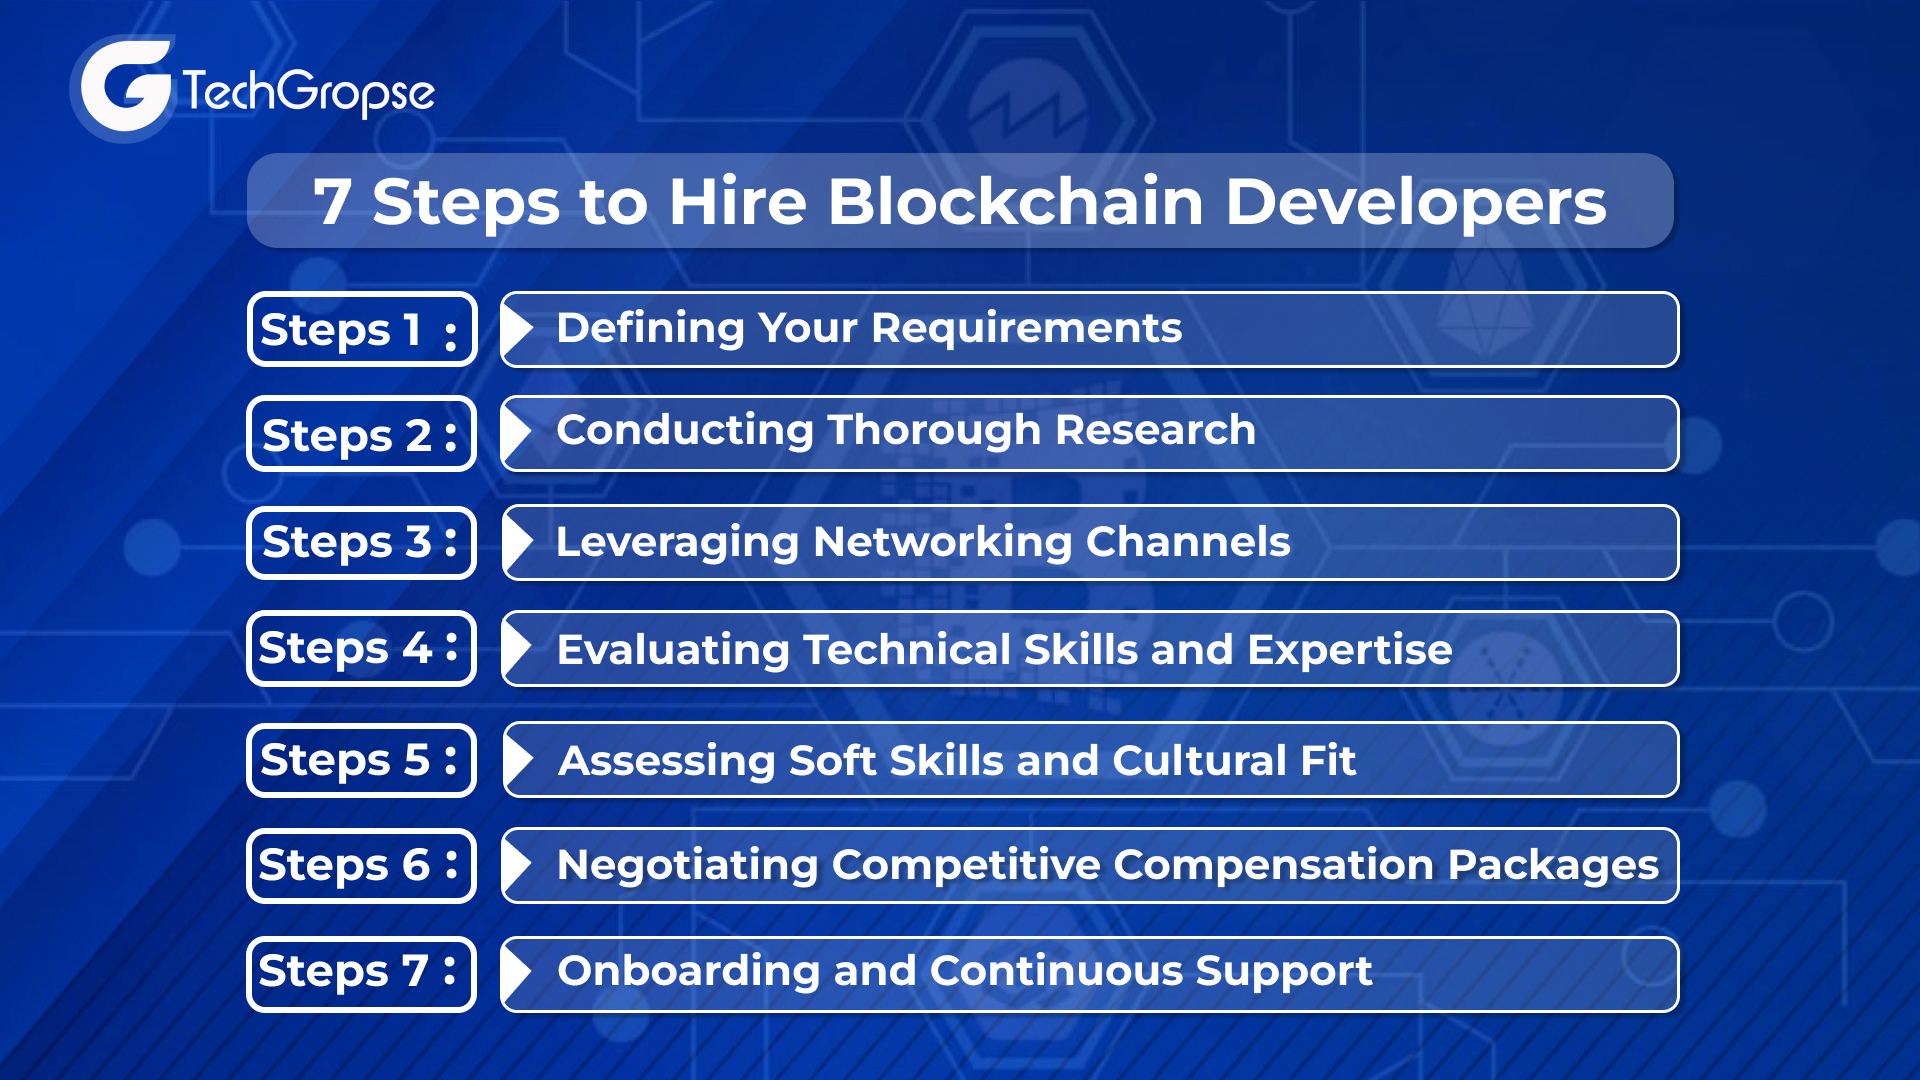 7 Steps to Hire Blockchain Developers 